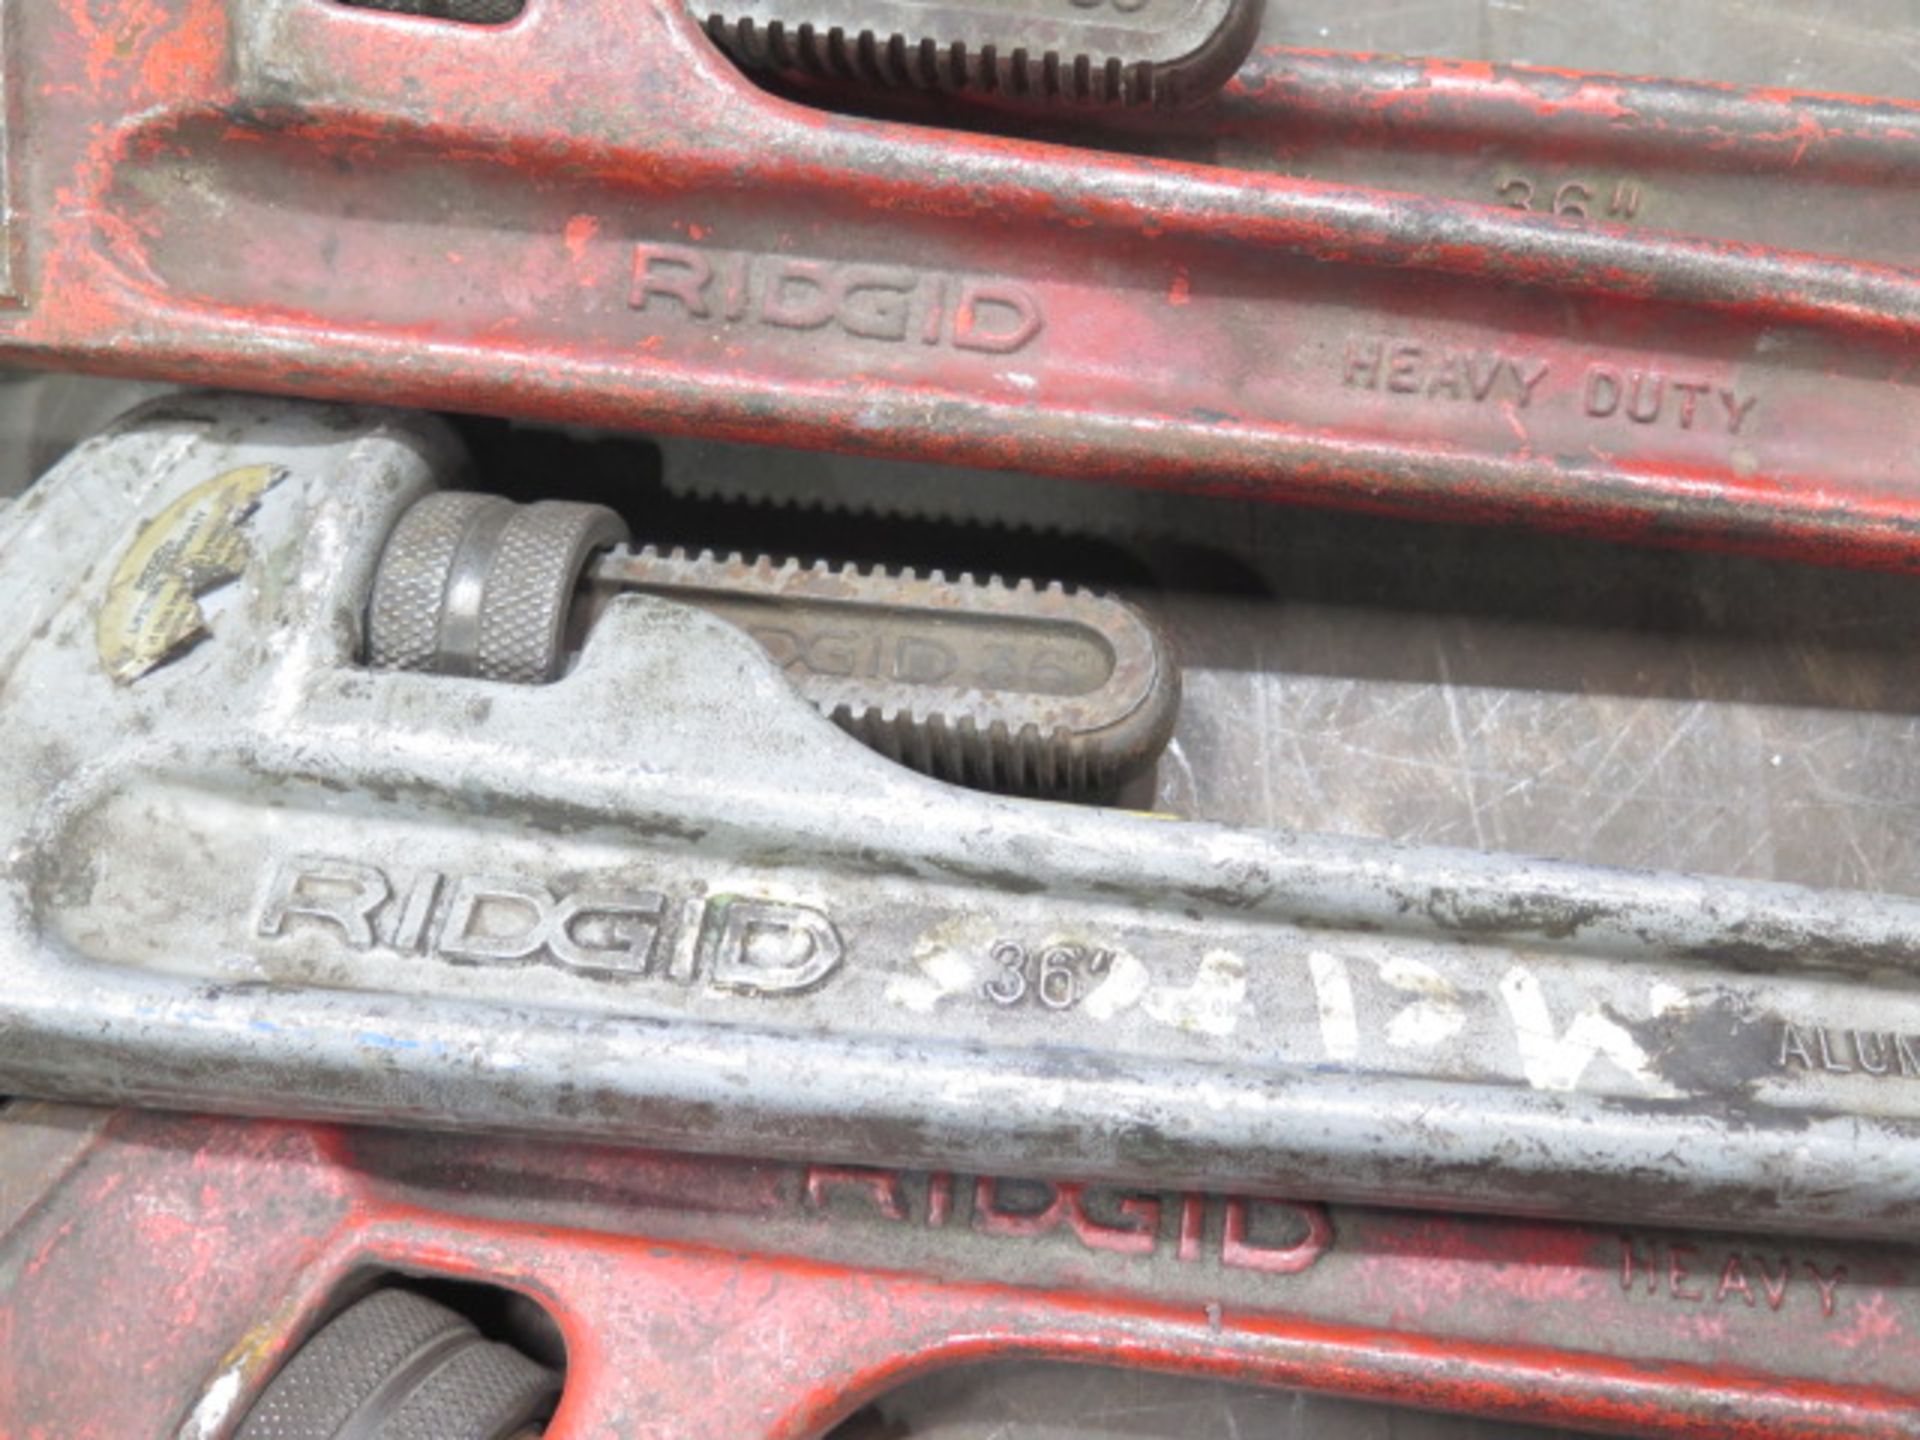 Ridgid 36" Pipe Wrenches (4) (SOLD AS-IS - NO WARRANTY) - Image 4 of 4